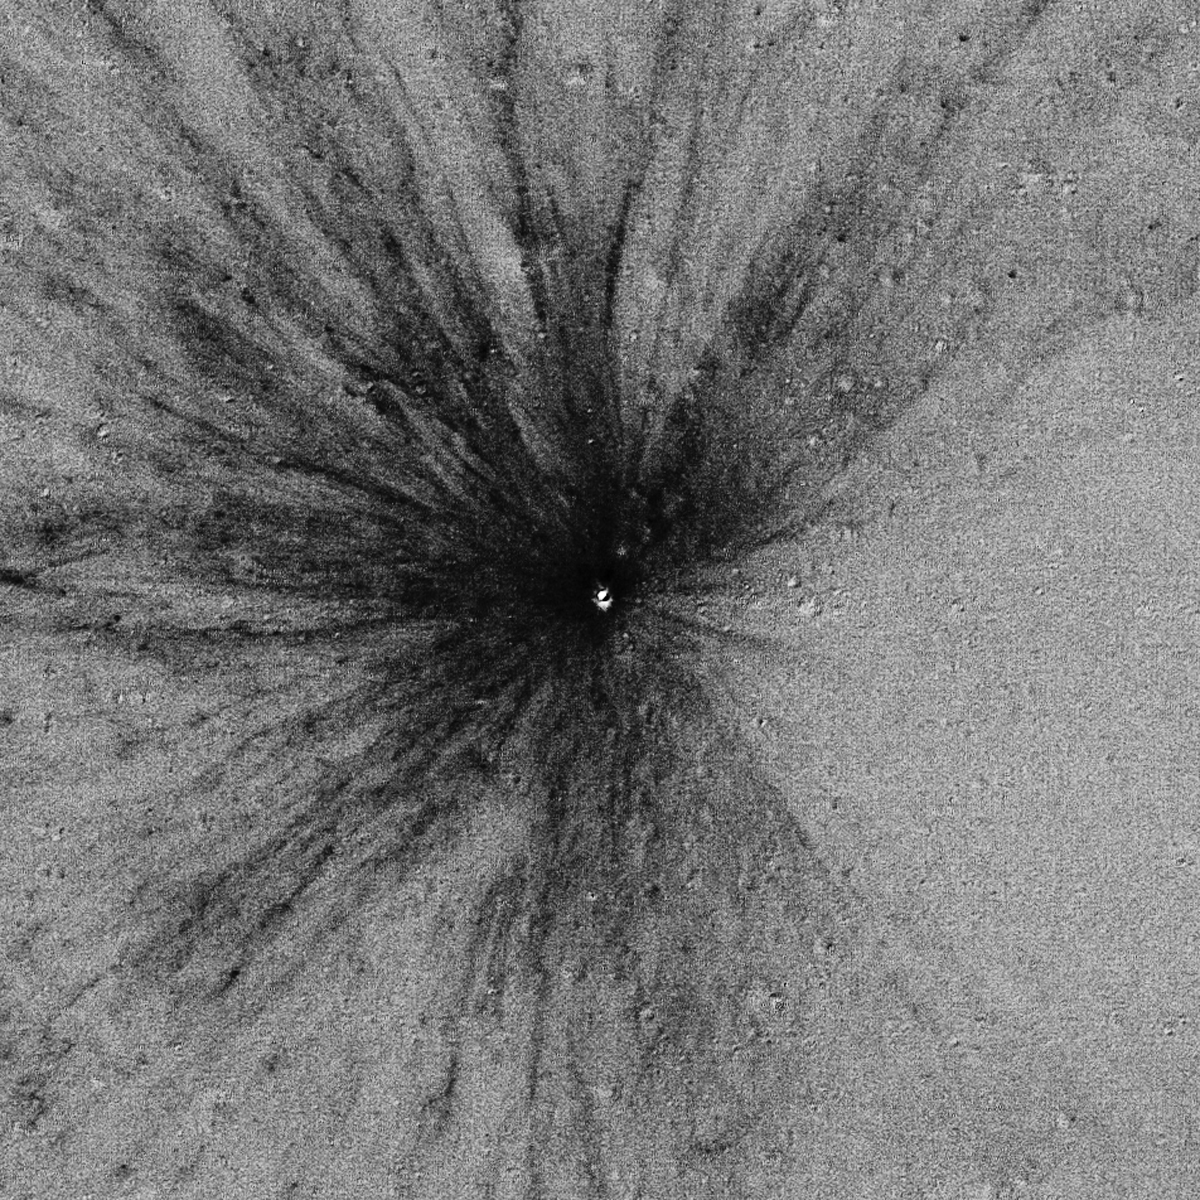 LROC ratio image revealing a new crater on the Moon